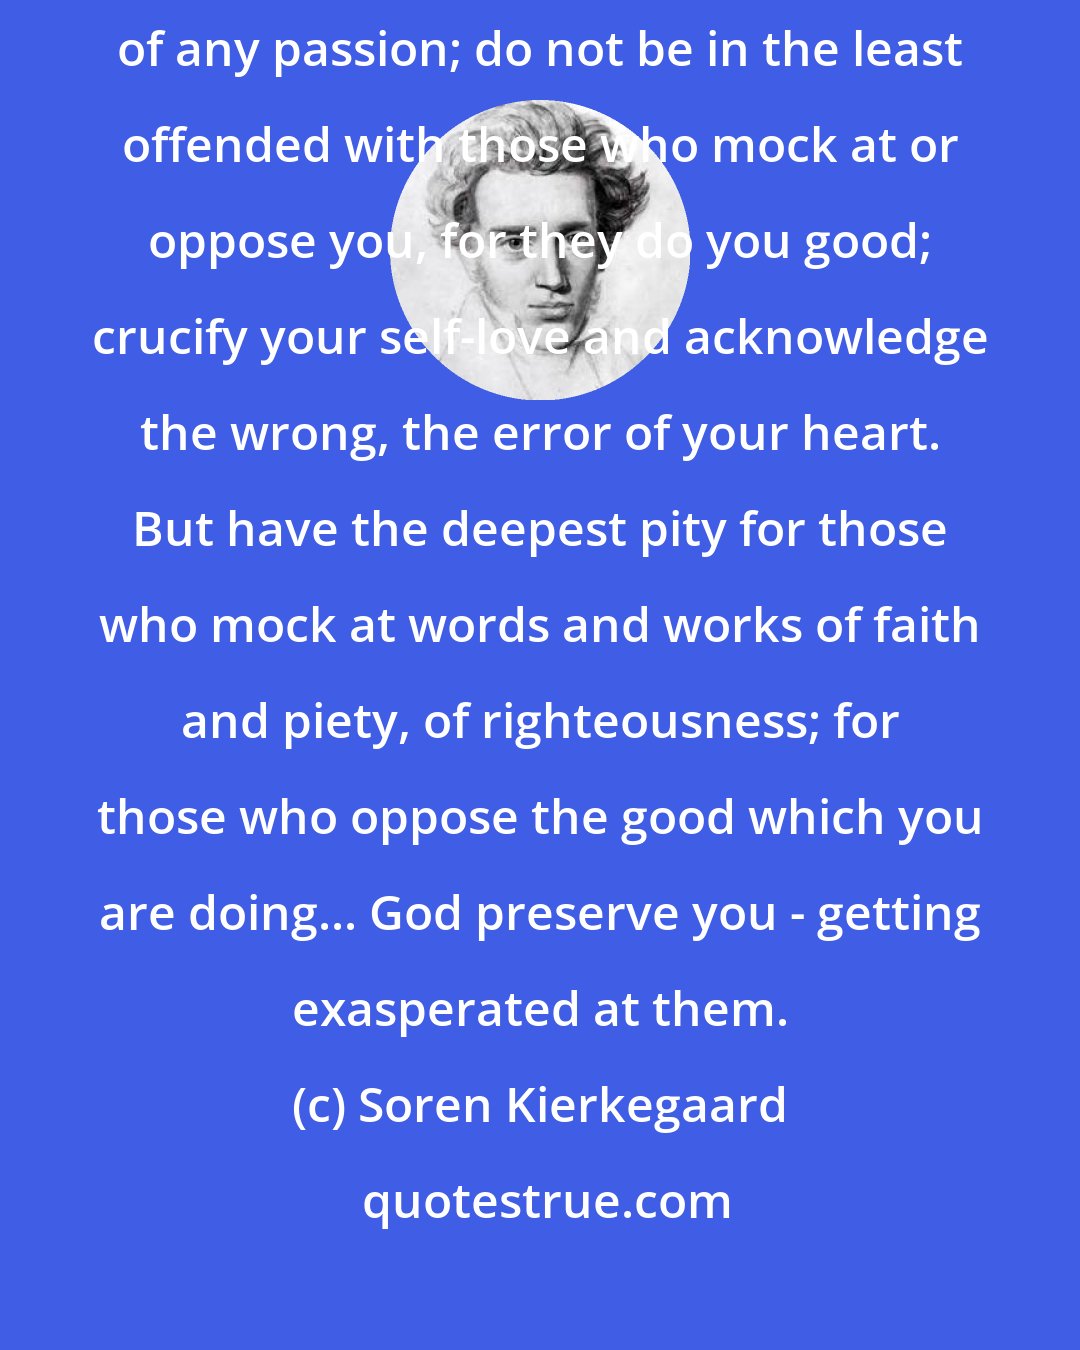 Soren Kierkegaard: Let others mock at you, oppose you, when you are under the influence of any passion; do not be in the least offended with those who mock at or oppose you, for they do you good; crucify your self-love and acknowledge the wrong, the error of your heart. But have the deepest pity for those who mock at words and works of faith and piety, of righteousness; for those who oppose the good which you are doing... God preserve you - getting exasperated at them.